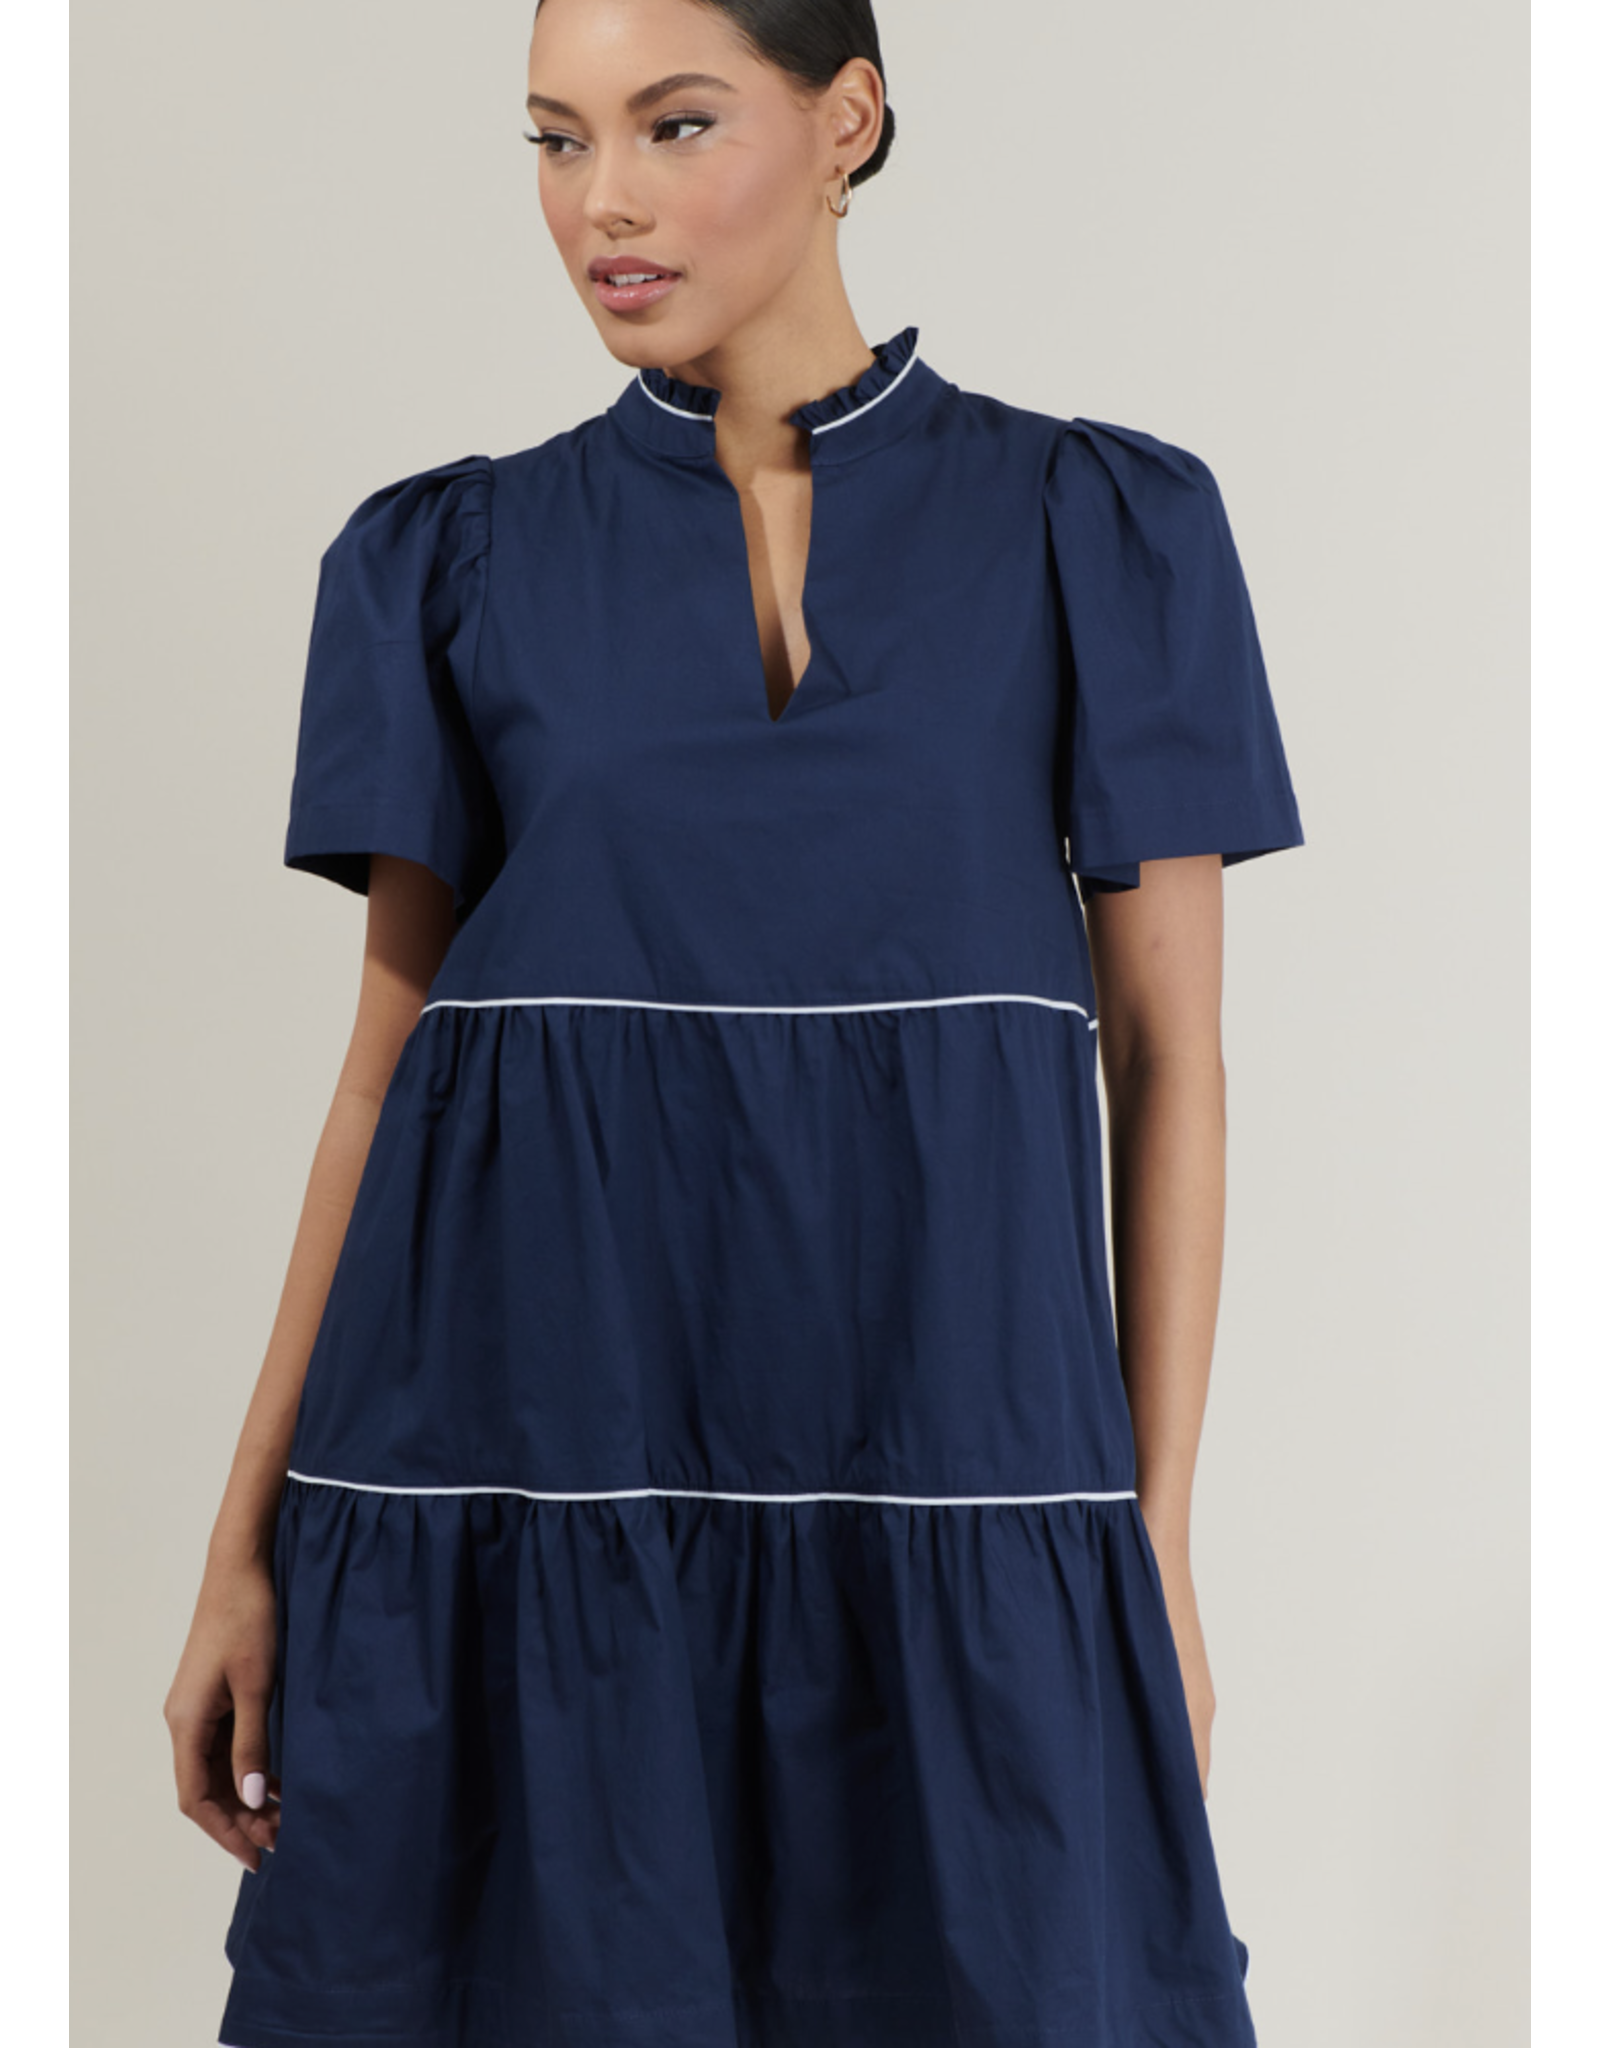 NAVY WITH WHITE PIPING SHIFT MINI DRESS